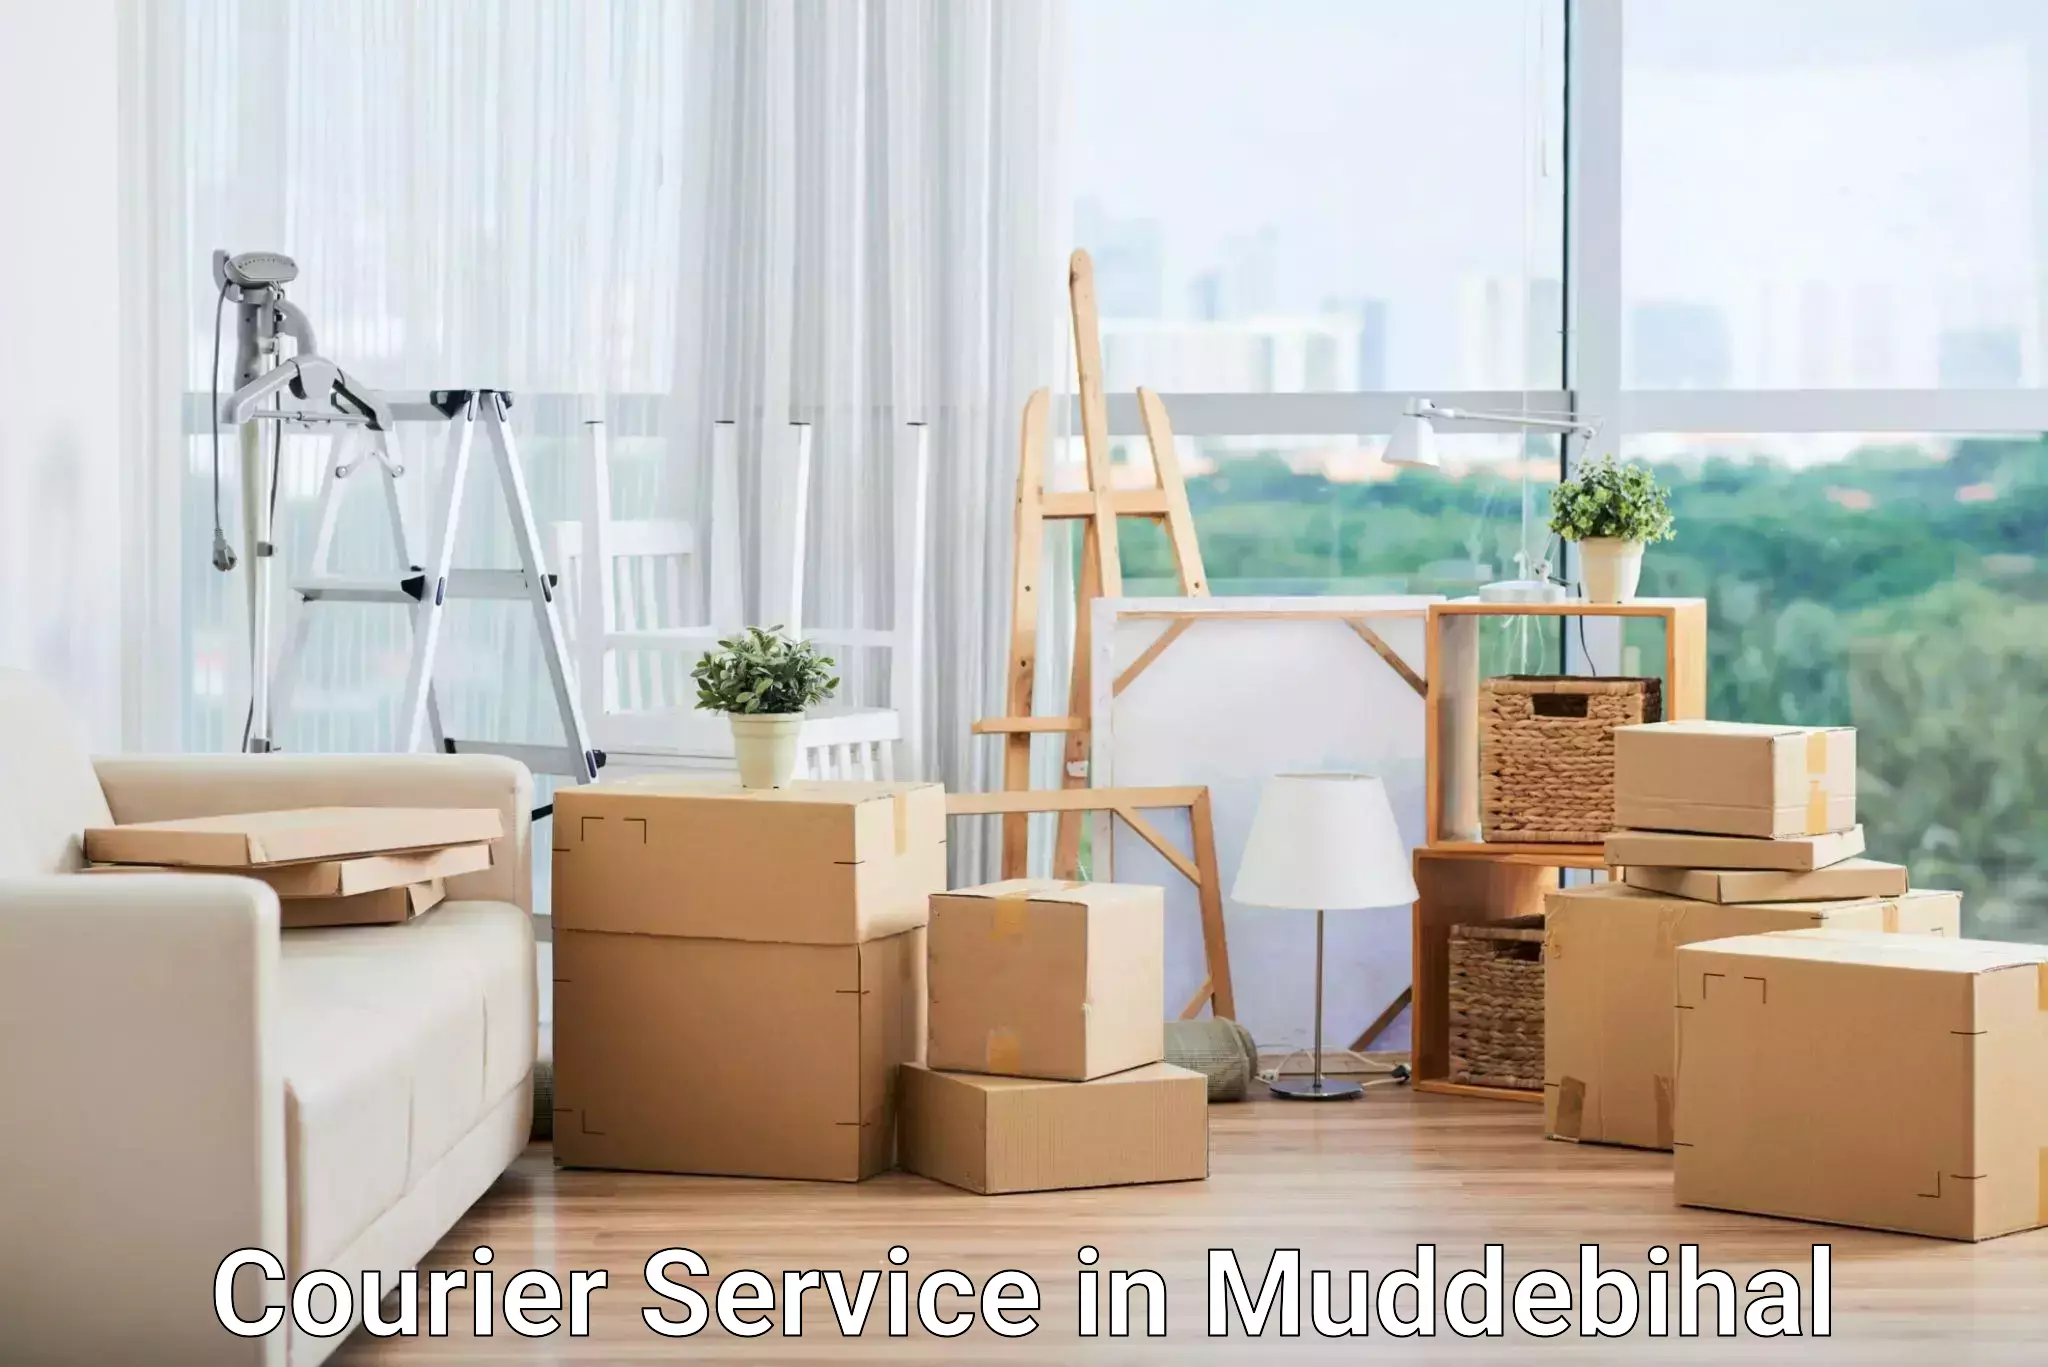 Flexible delivery schedules in Muddebihal